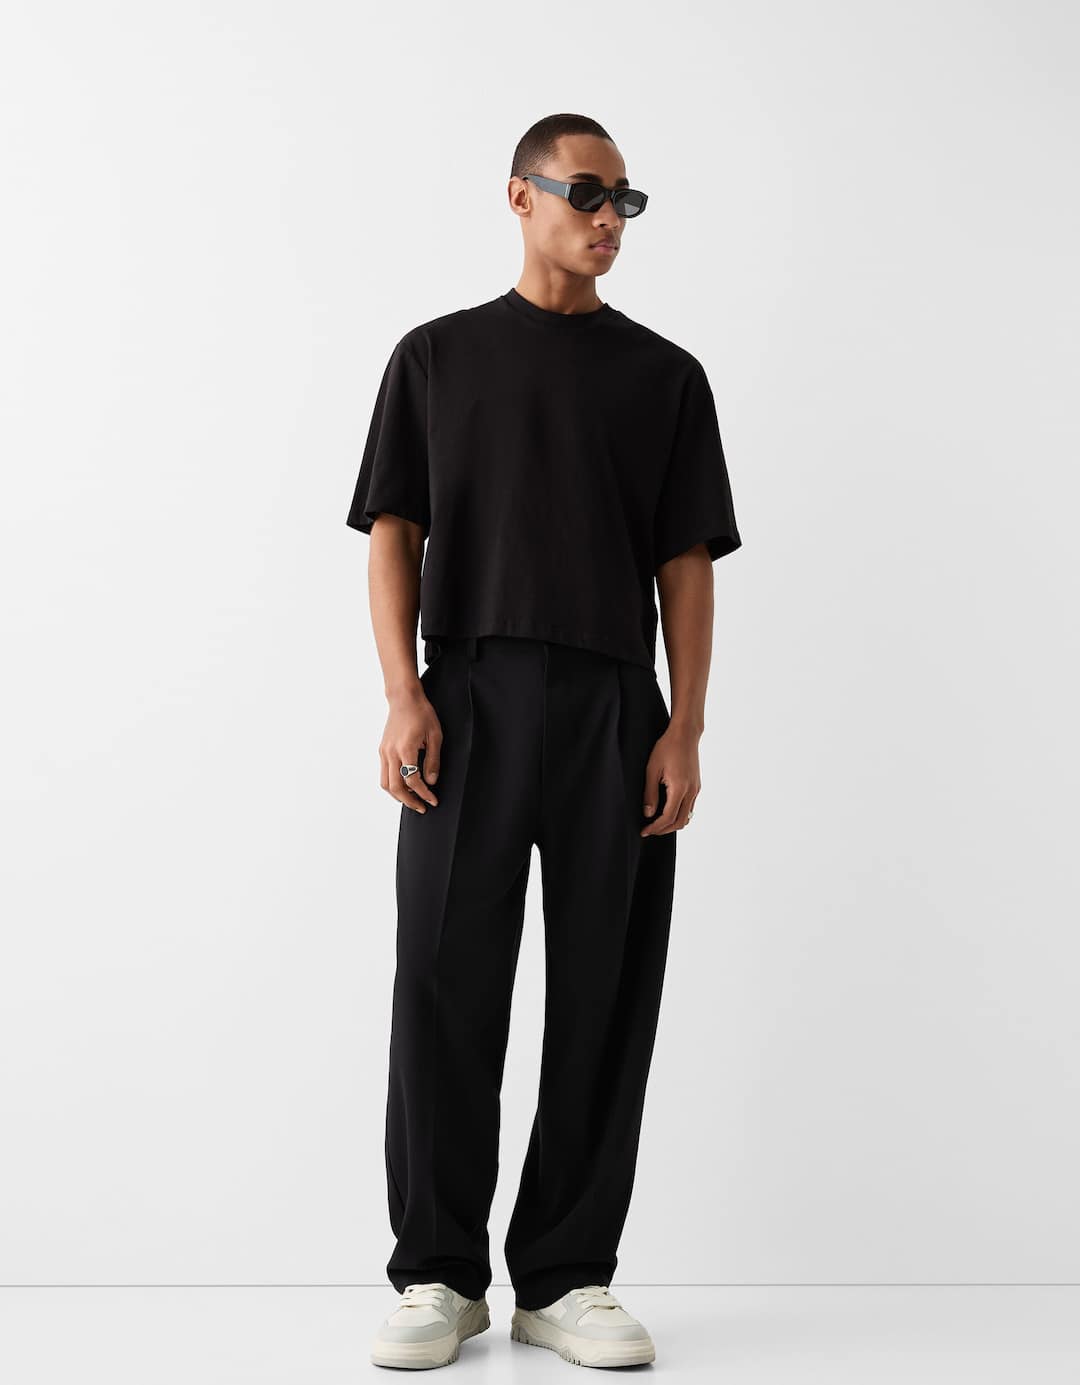 Tailored baggy trousers